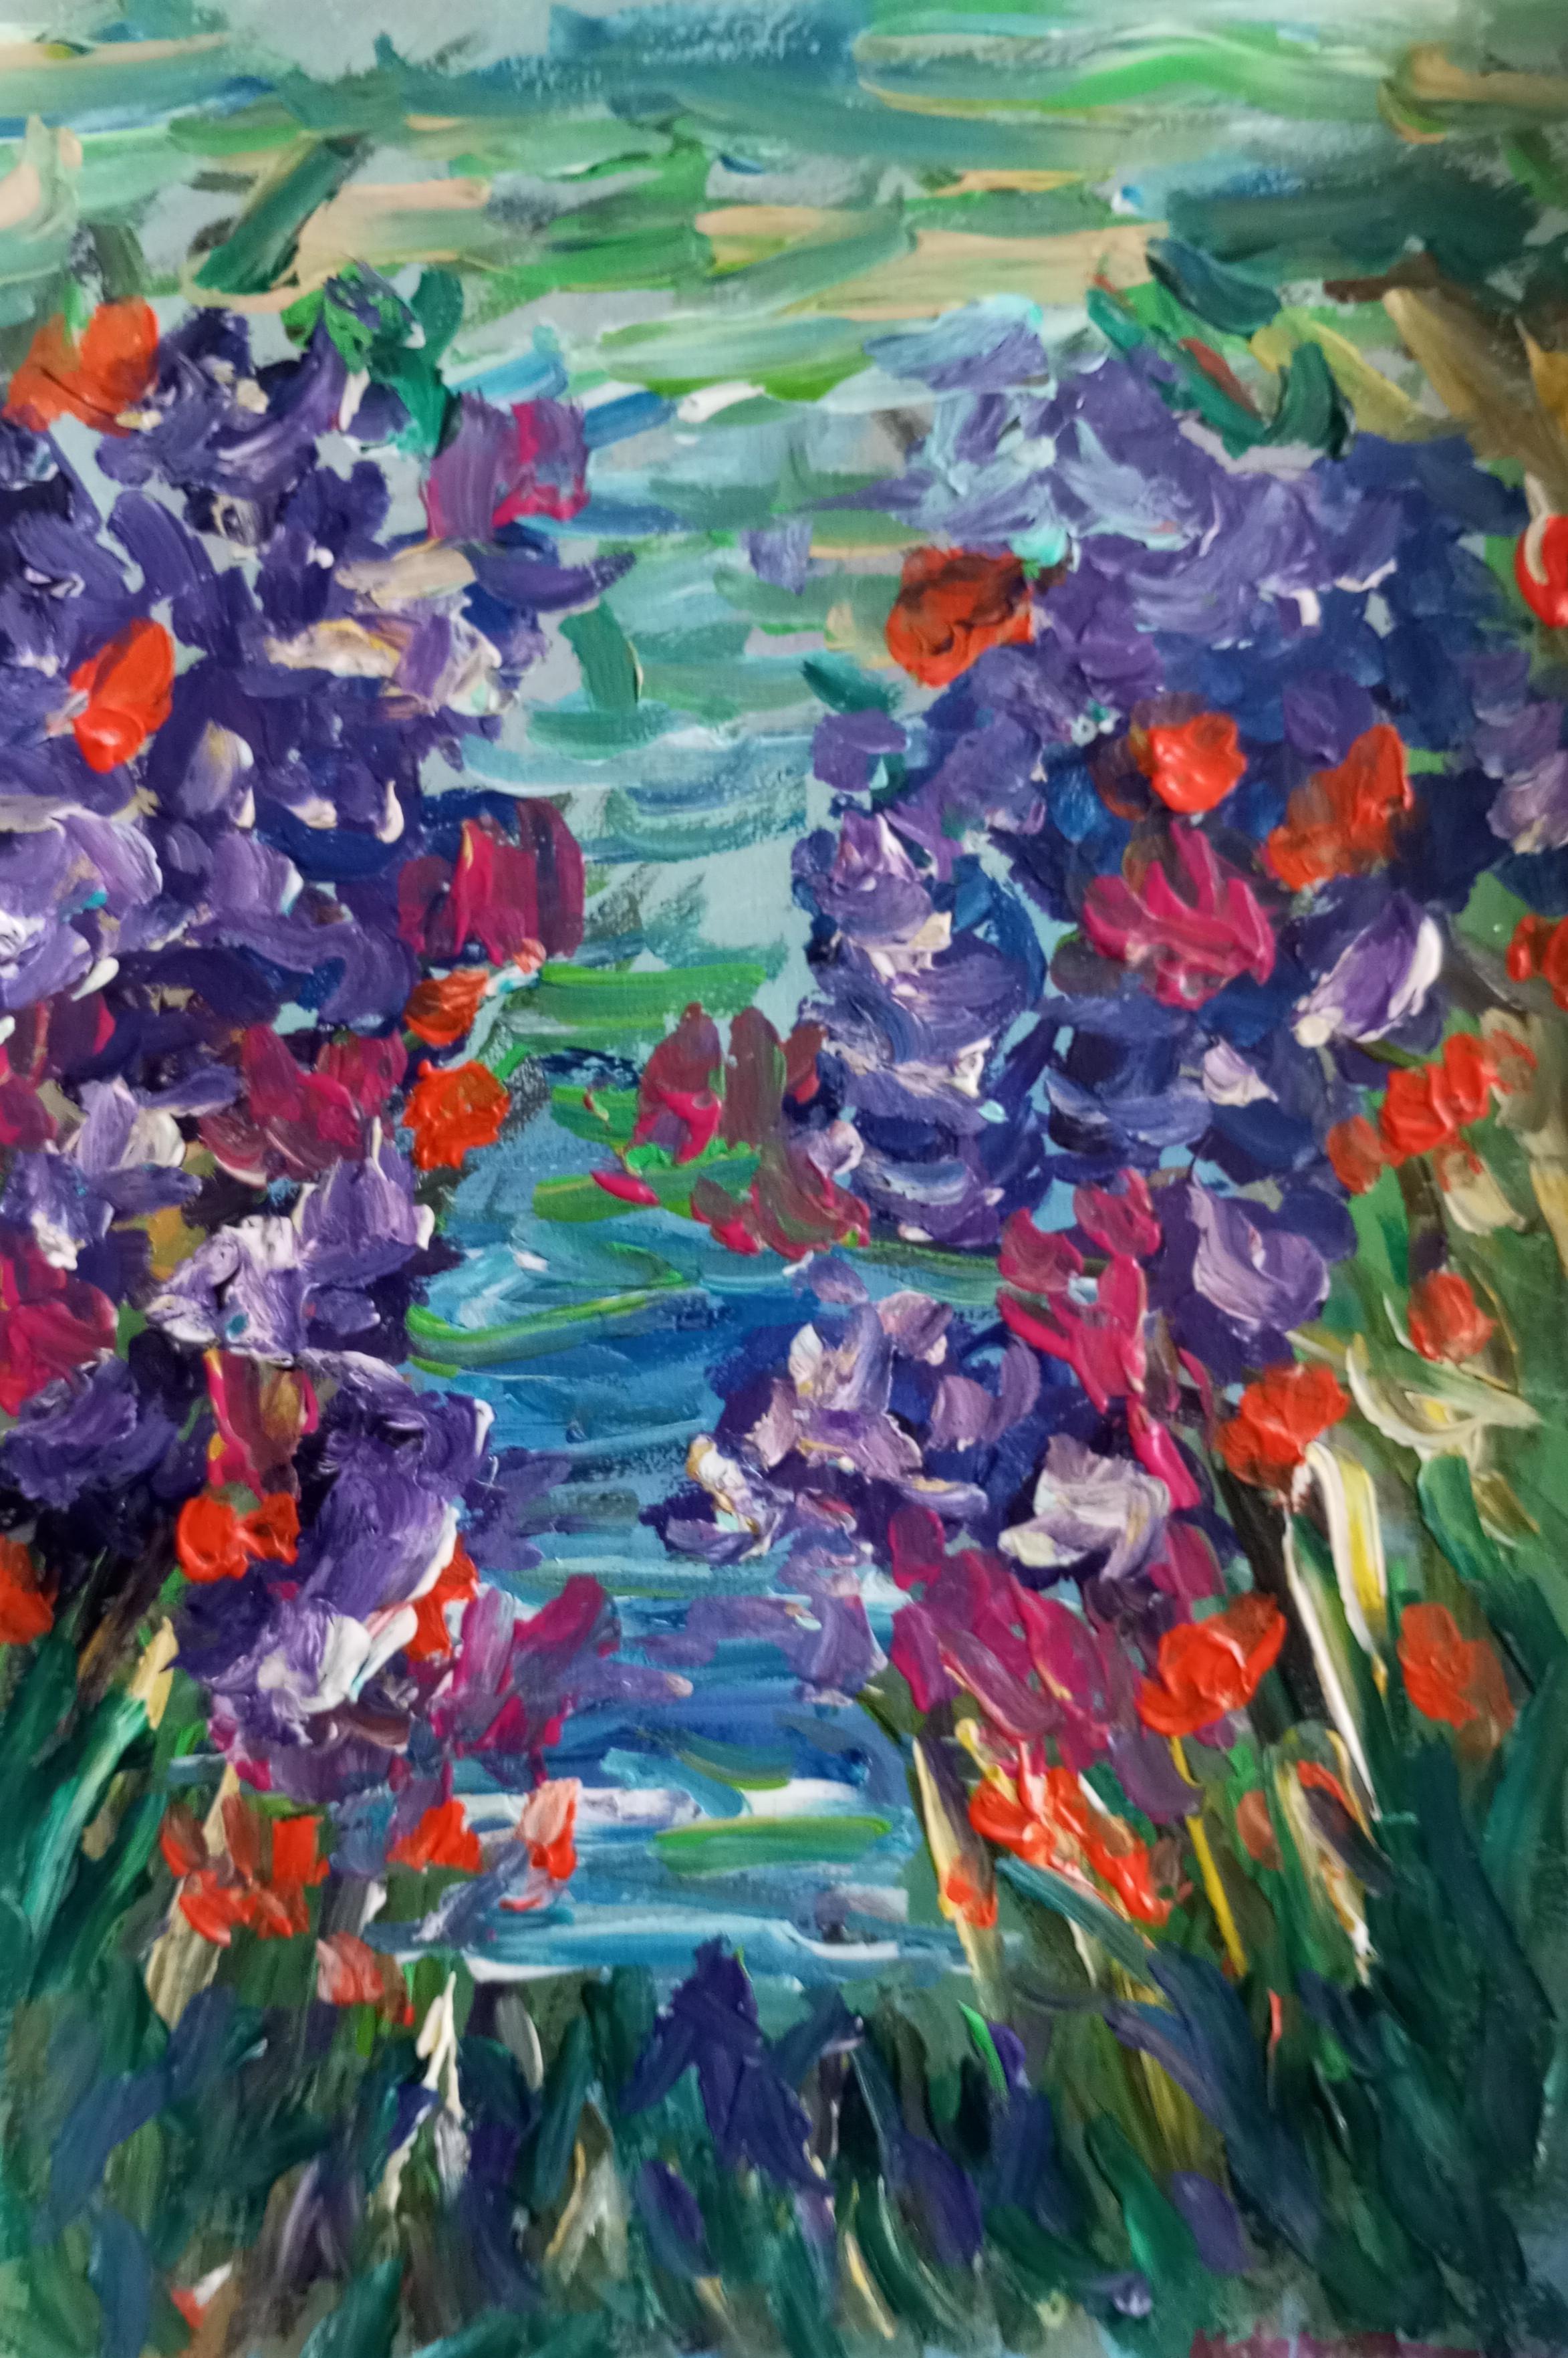 Natalya Mougenot  Abstract Painting - Water irises by the pond